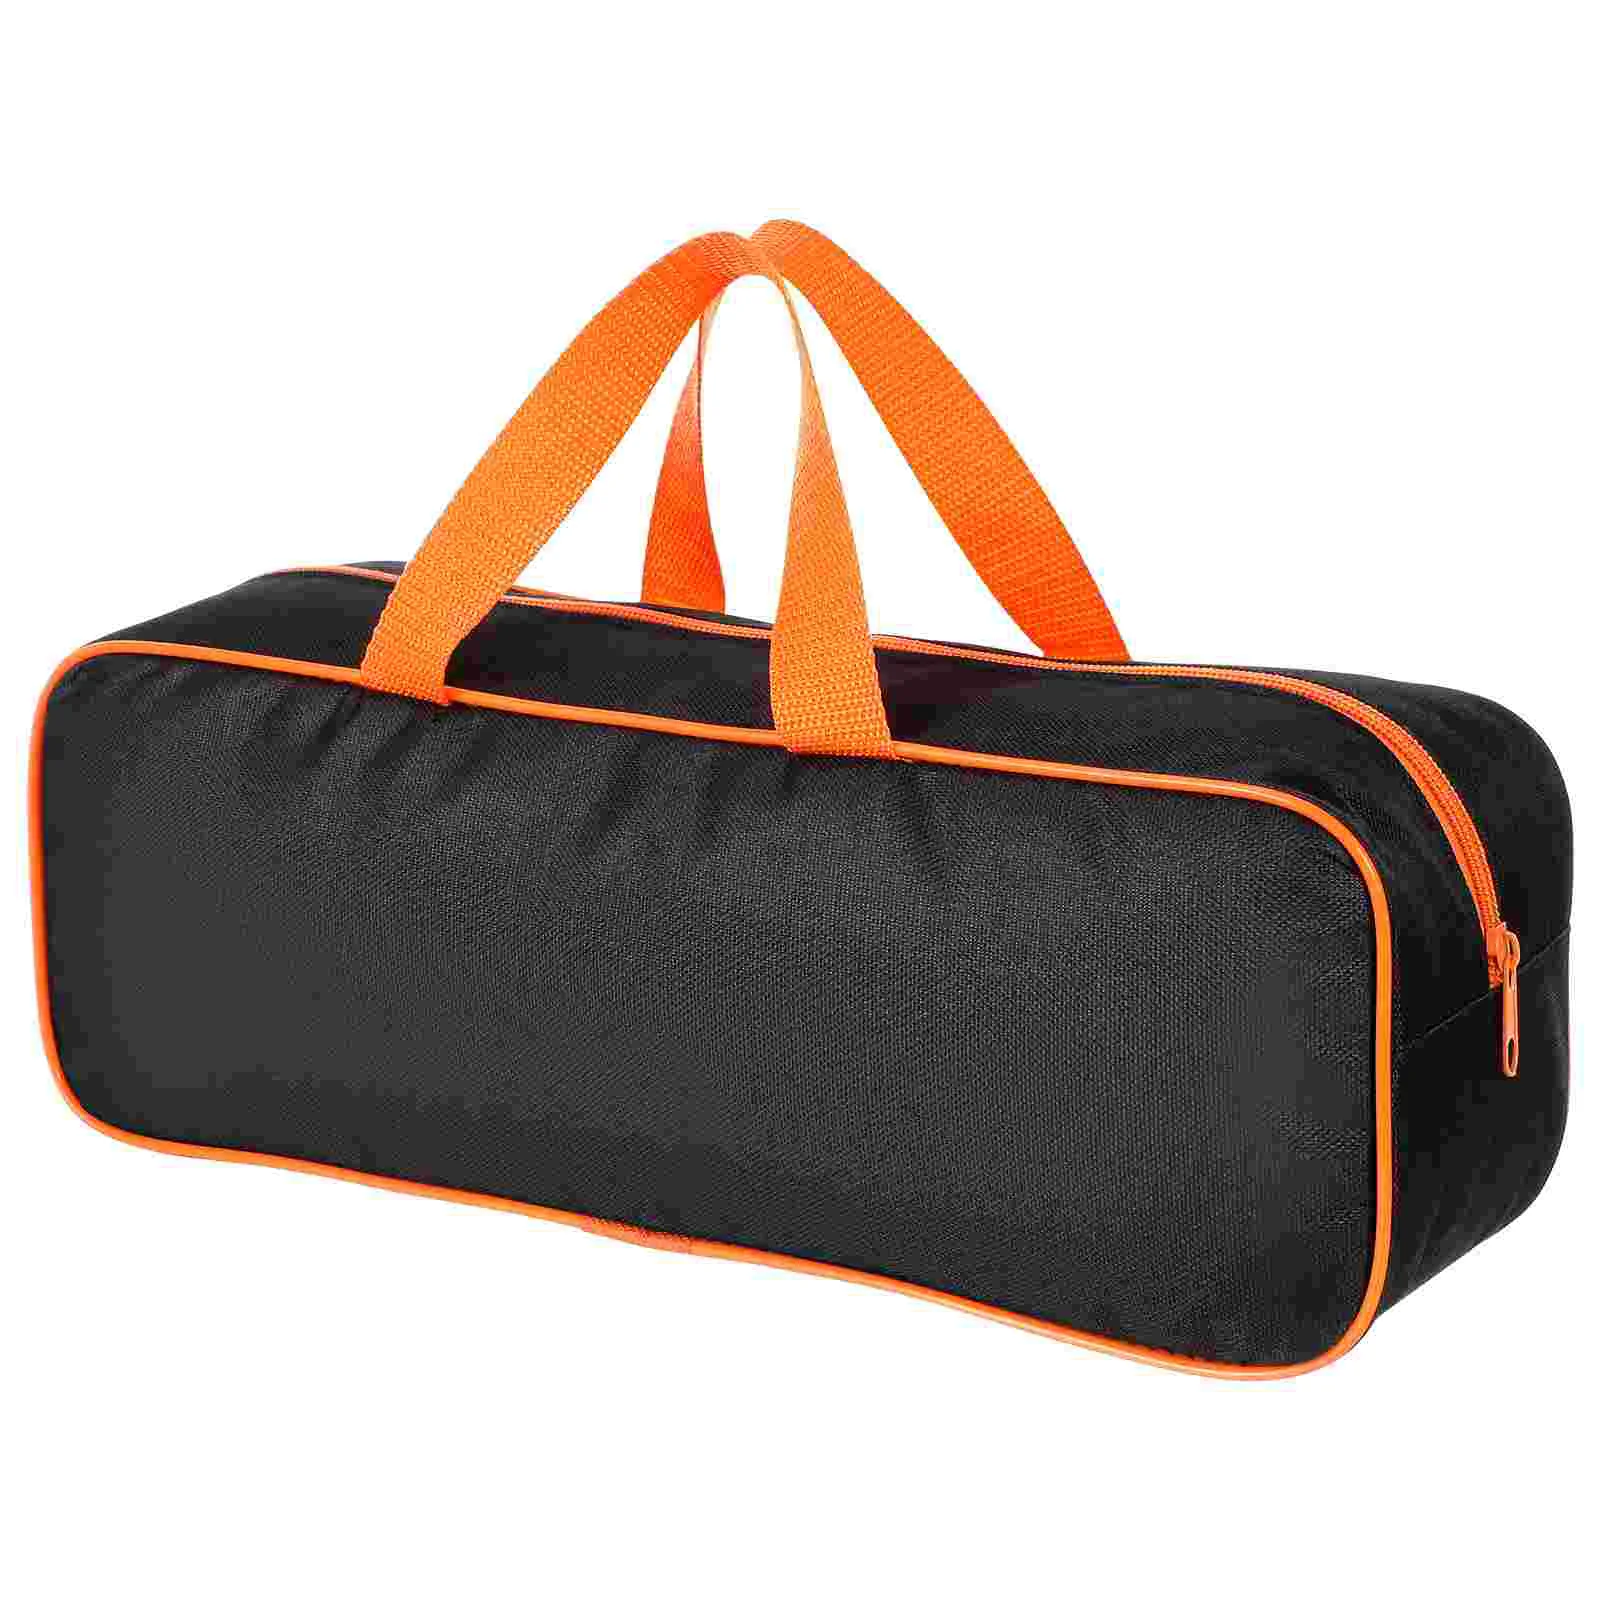 

Tool Storage Bag Camping Accessories Picnic Barbecue Camper Grill Tools Utensils Oxford Cloth Outdoor Carry Portable Dad